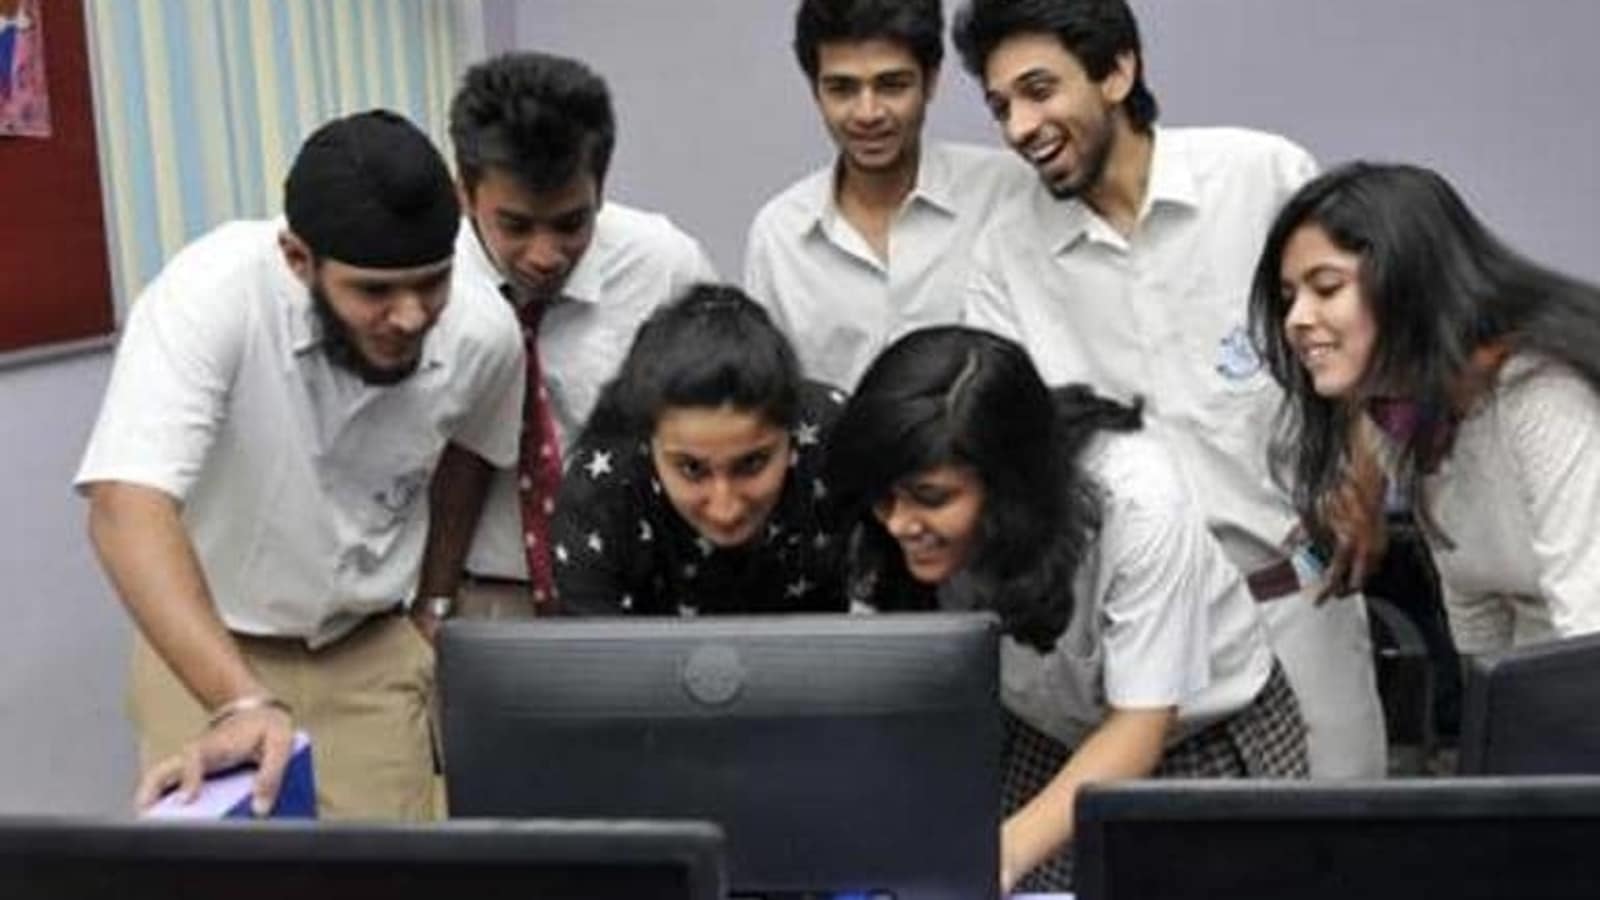 JEE Main 2021 answer key live update: Know how, where to download